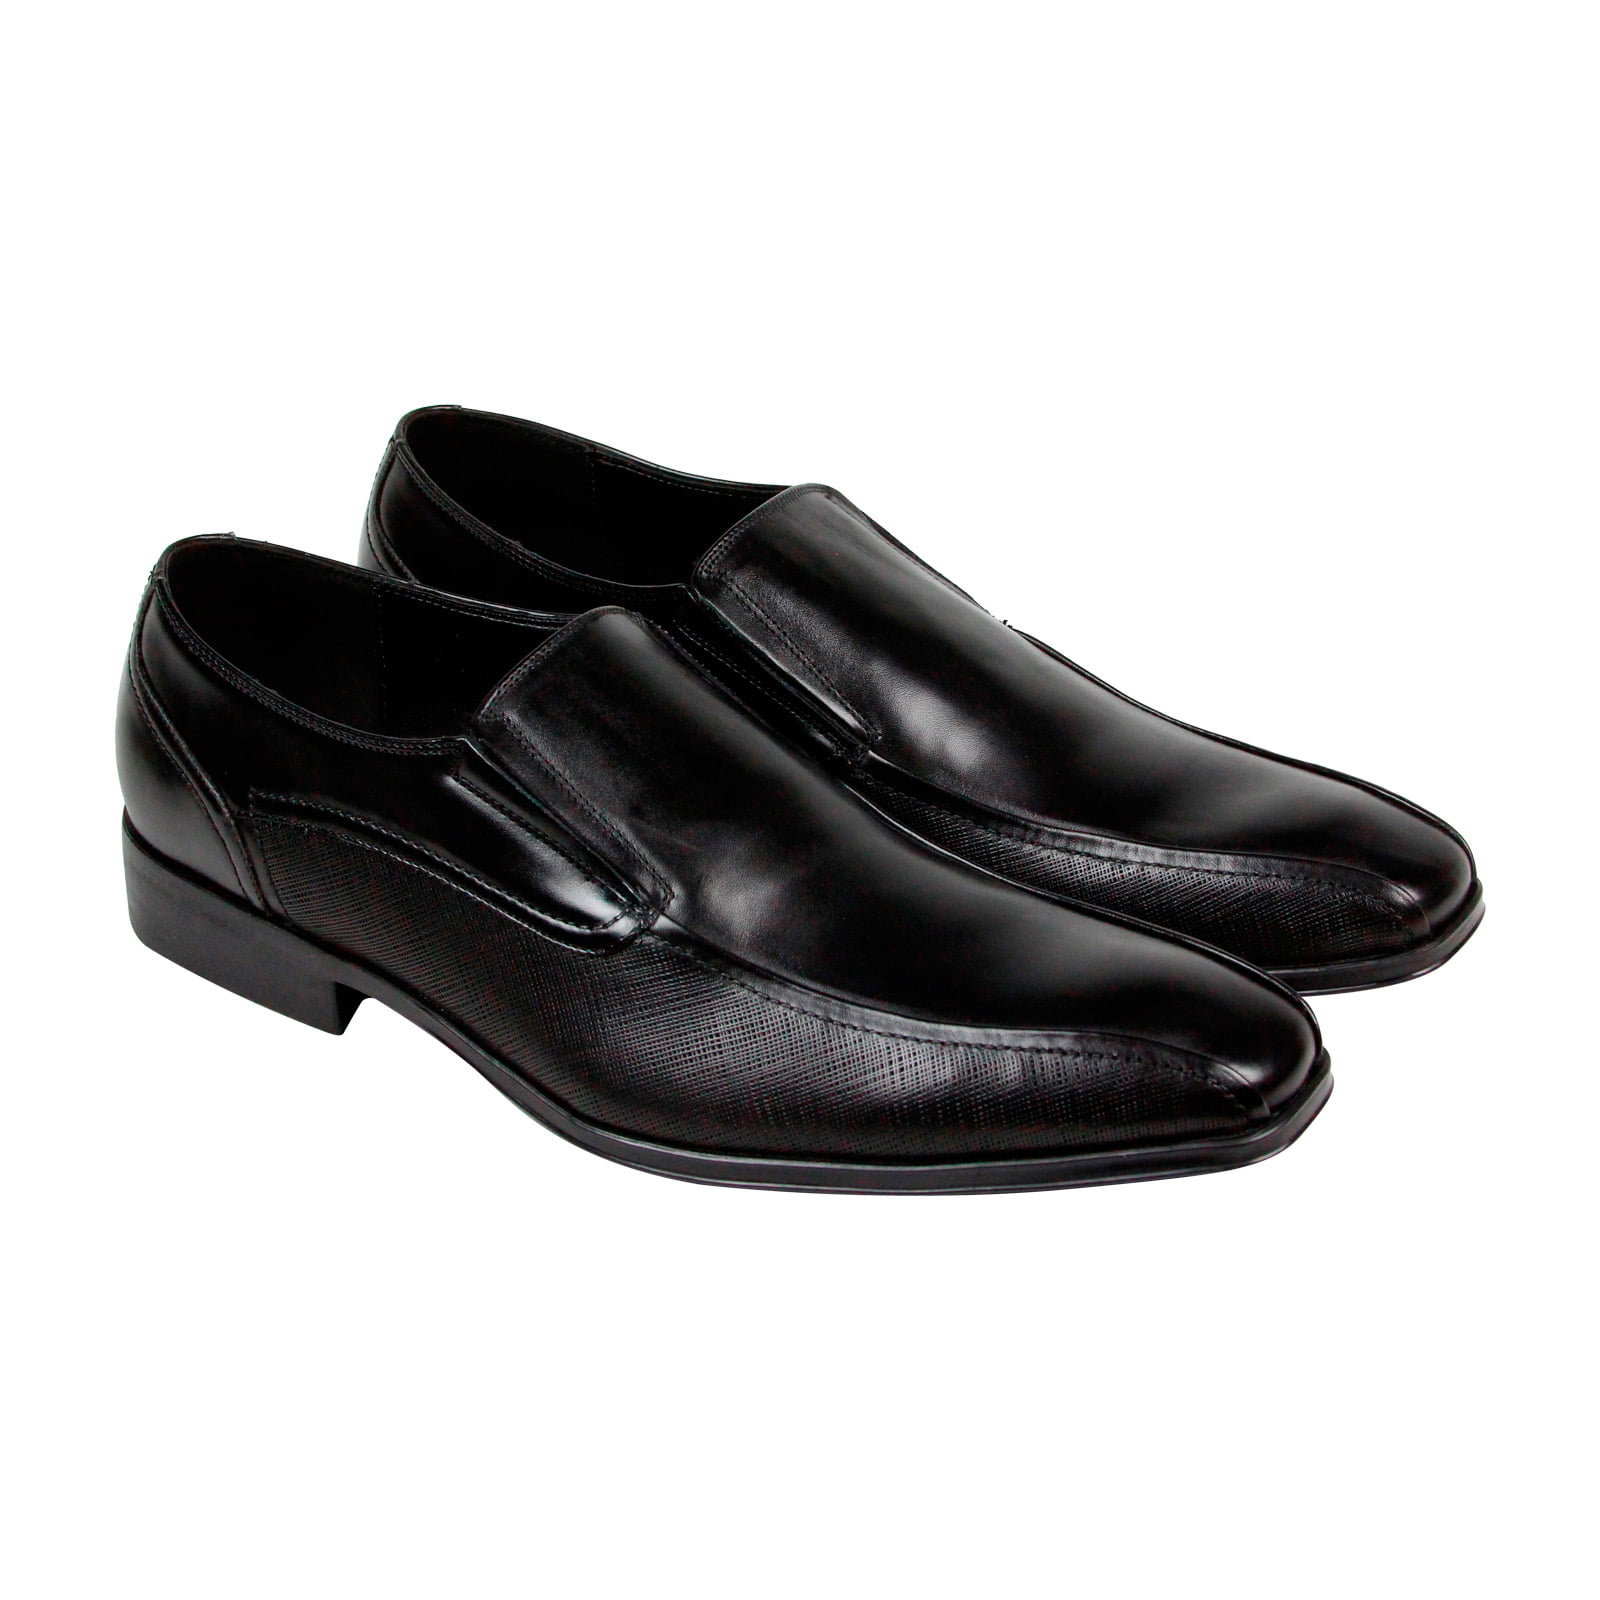 Kenneth Cole Reaction - Kenneth Cole Other Half Mens Black Leather ...